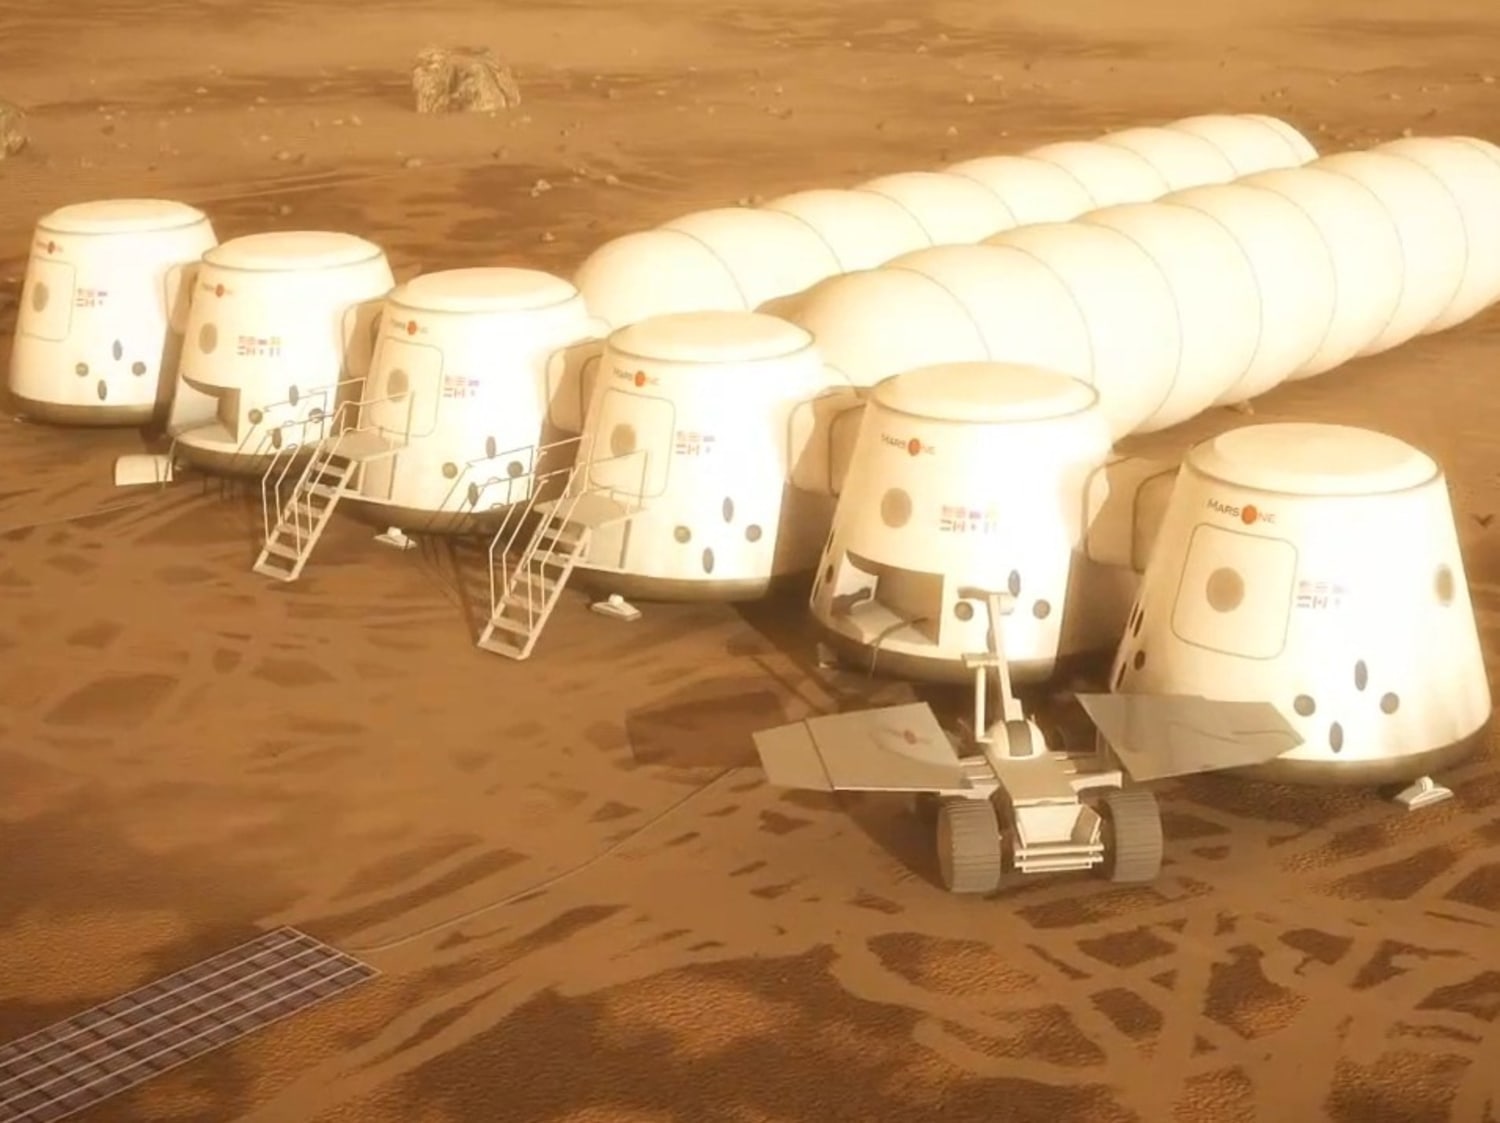 Mars One is not a scam and we WILL go to the red planet, CEO Bas